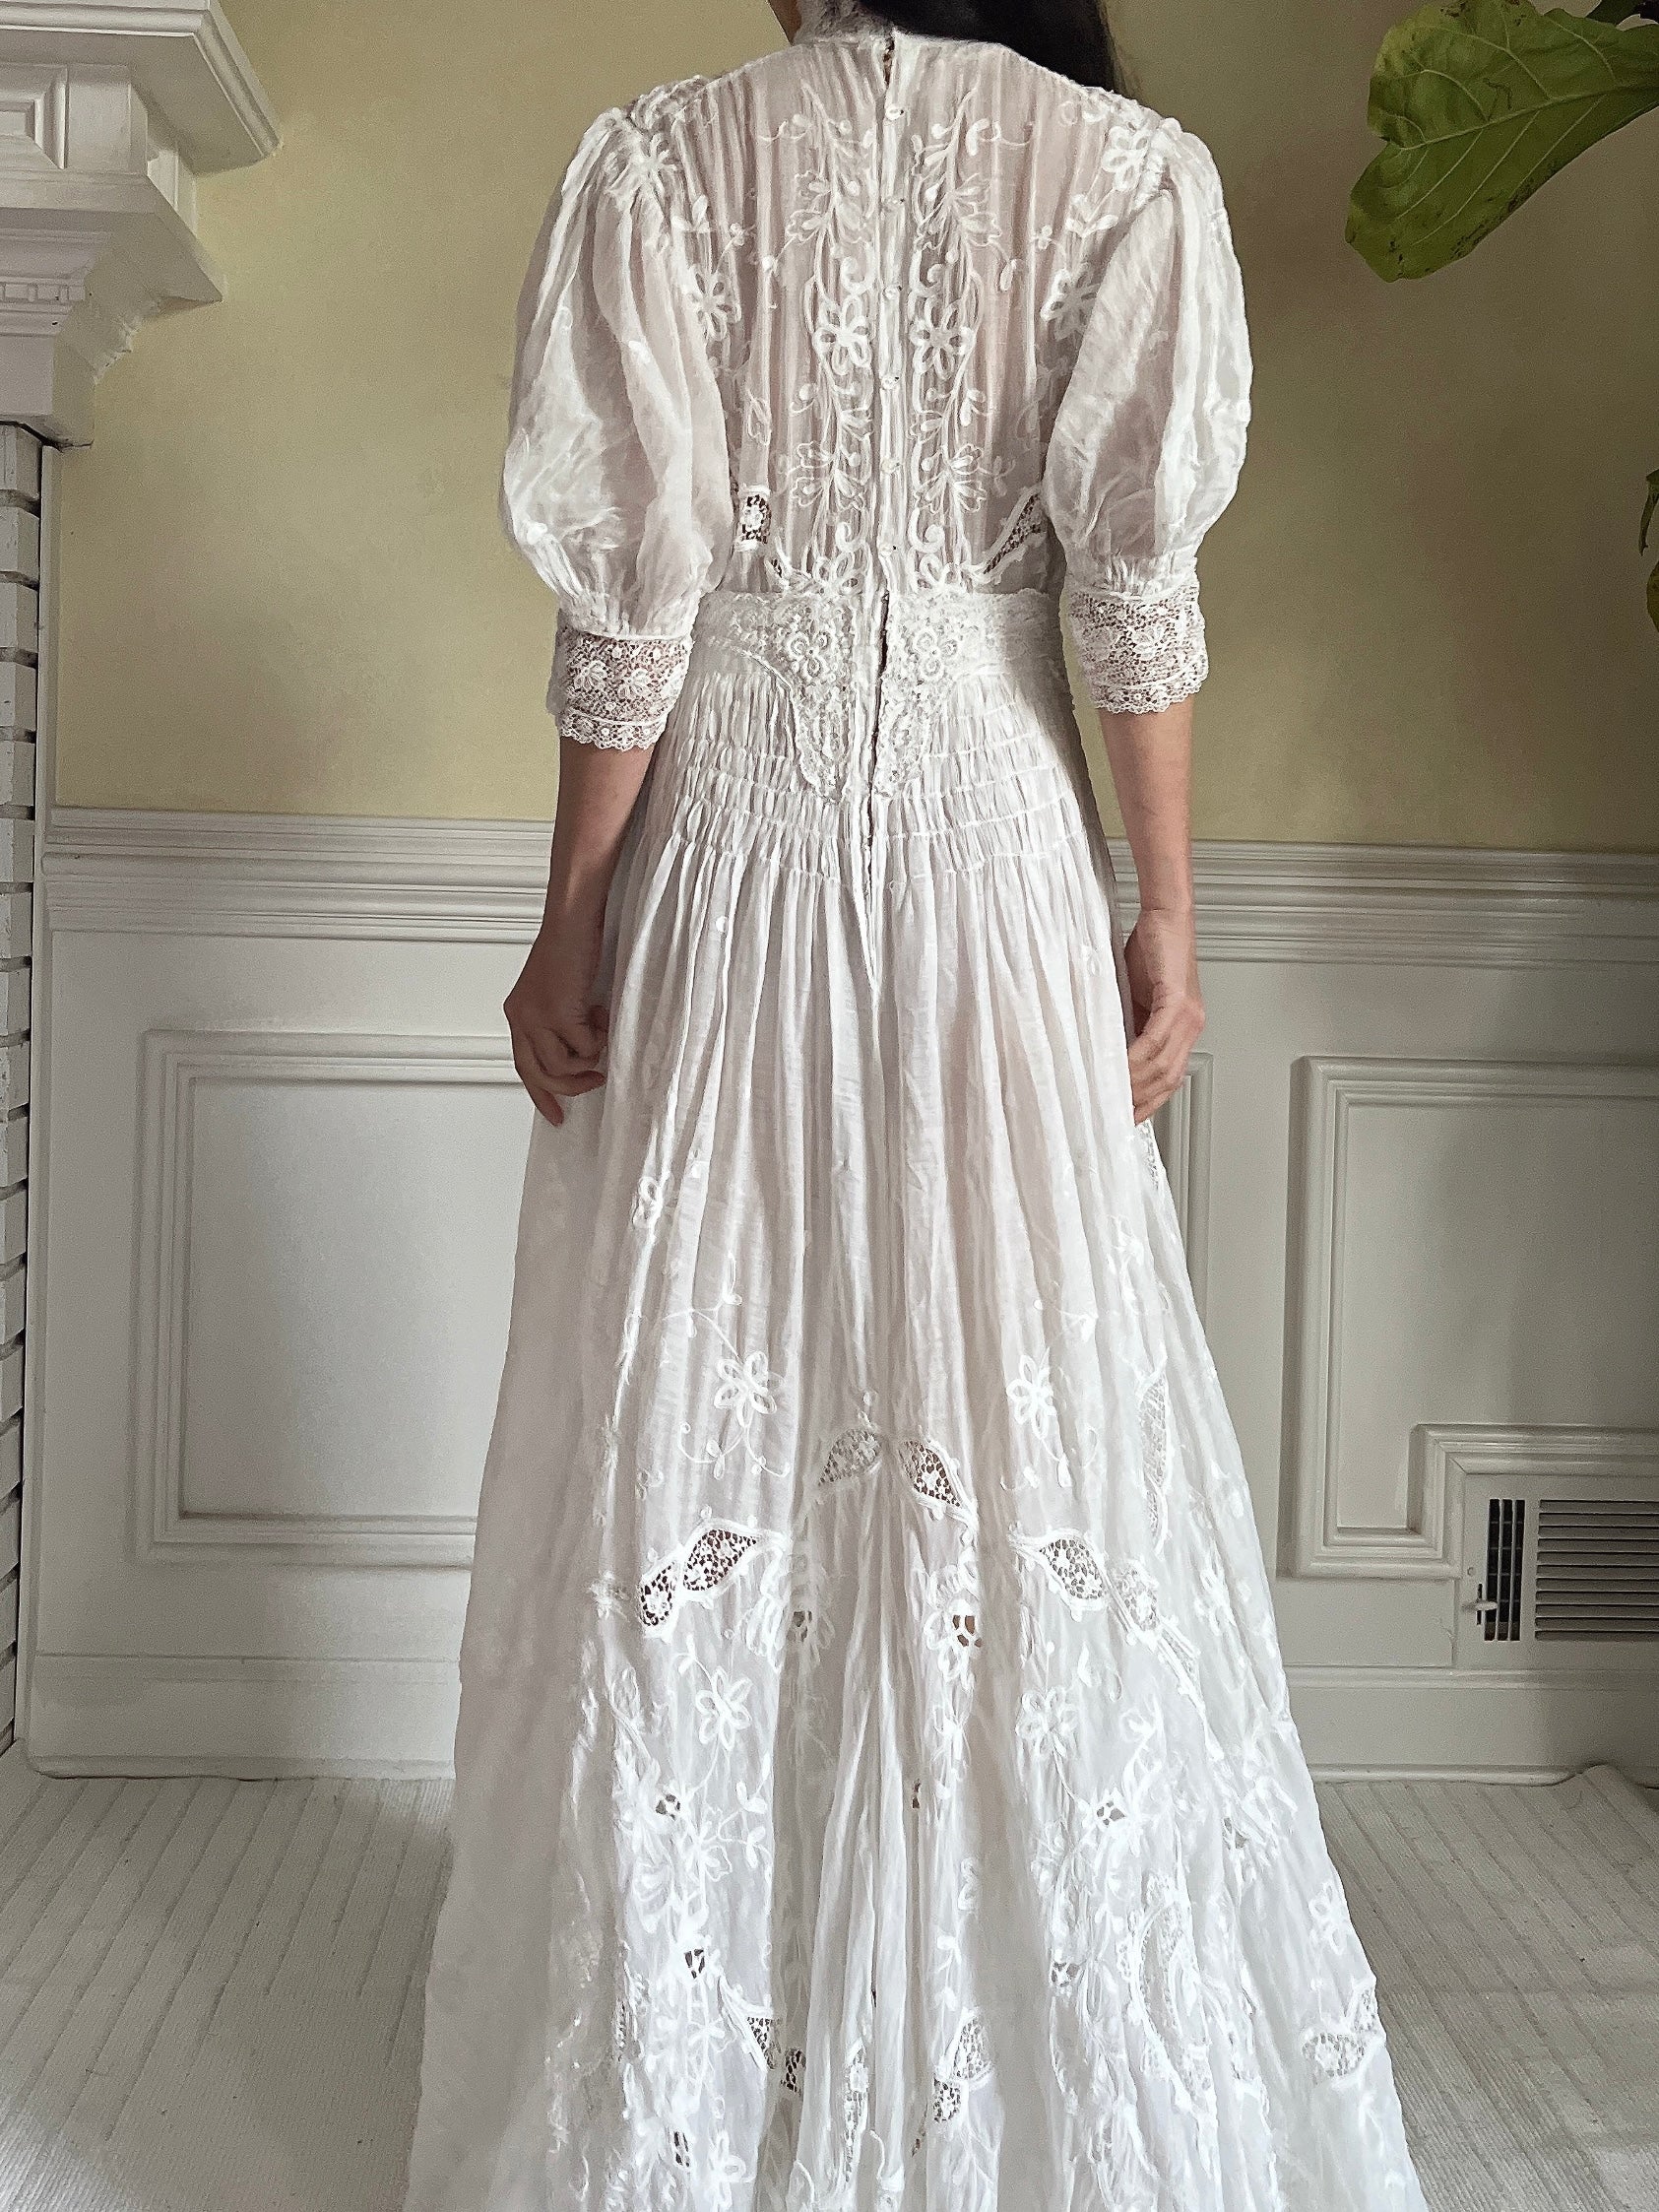 Antique Puff Sleeve Embroidered Dress - S